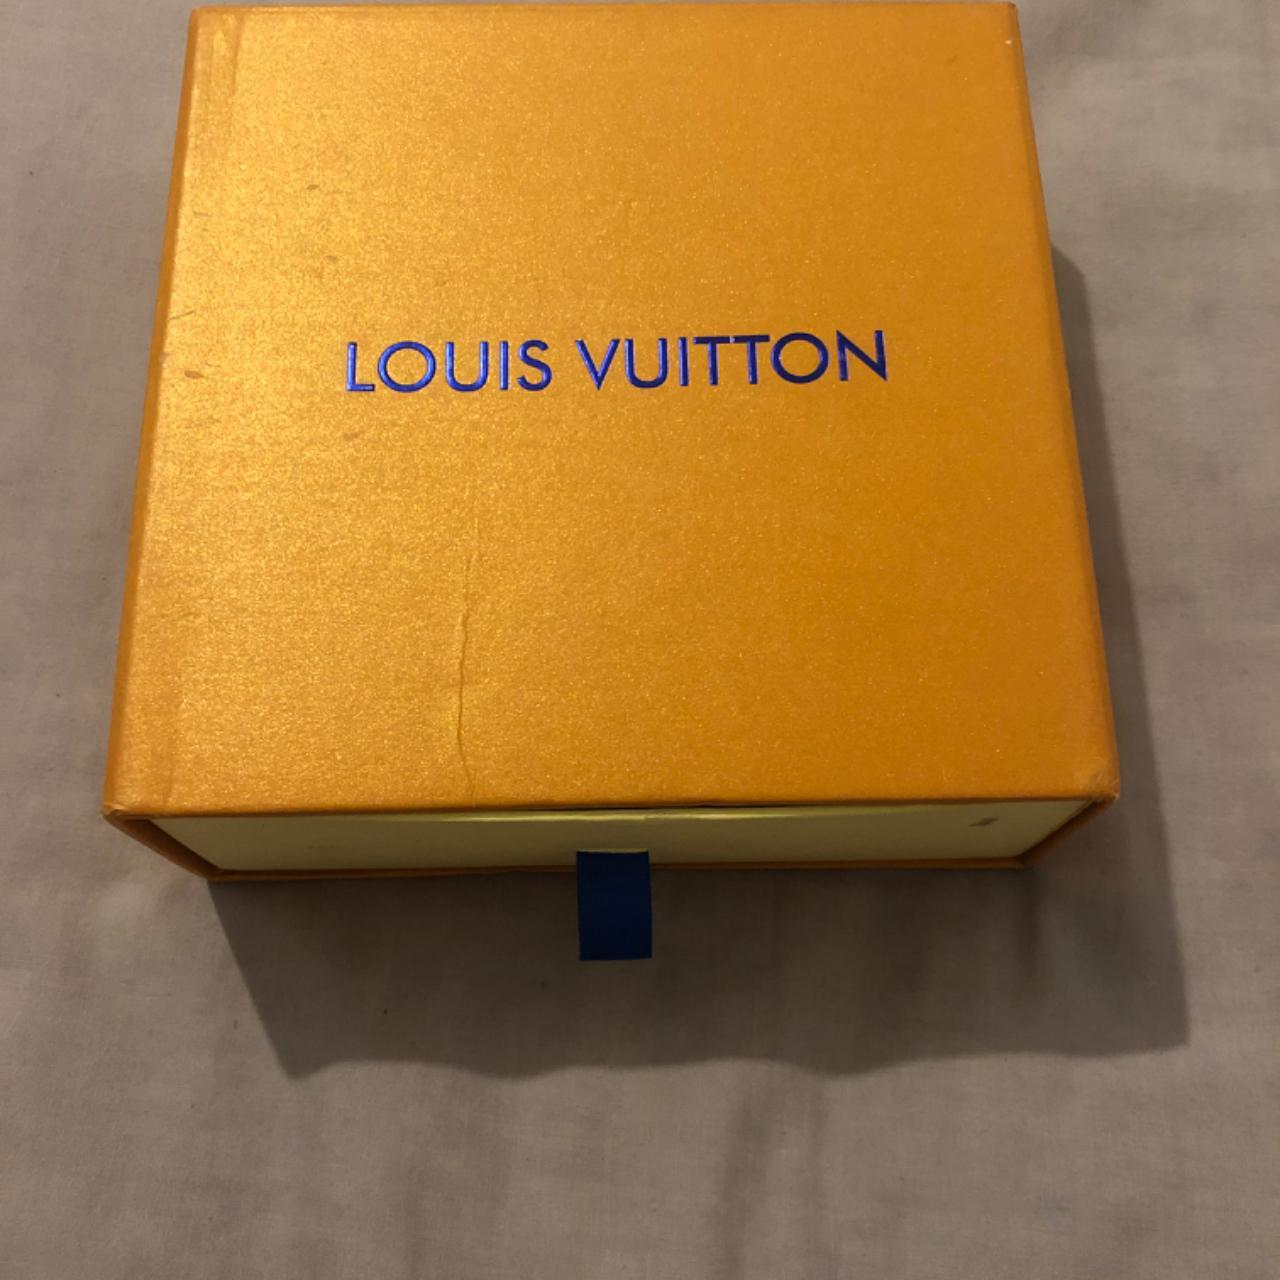 LOUIS VUITTON boxes (MESSAGE BEFORE BUYING) - - Depop